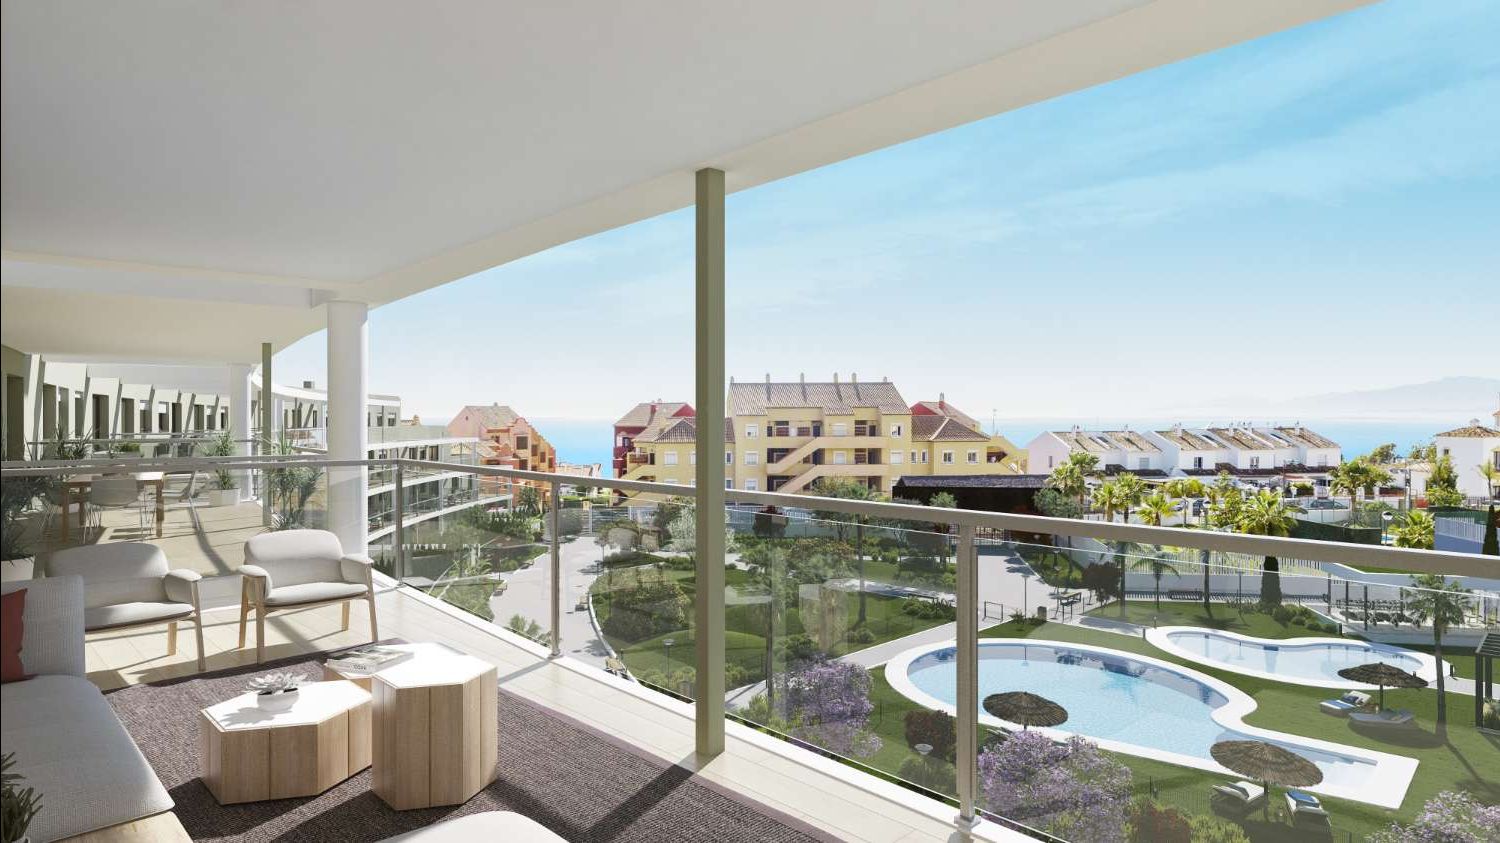 New and modern homes with sea views - Costa del Sol